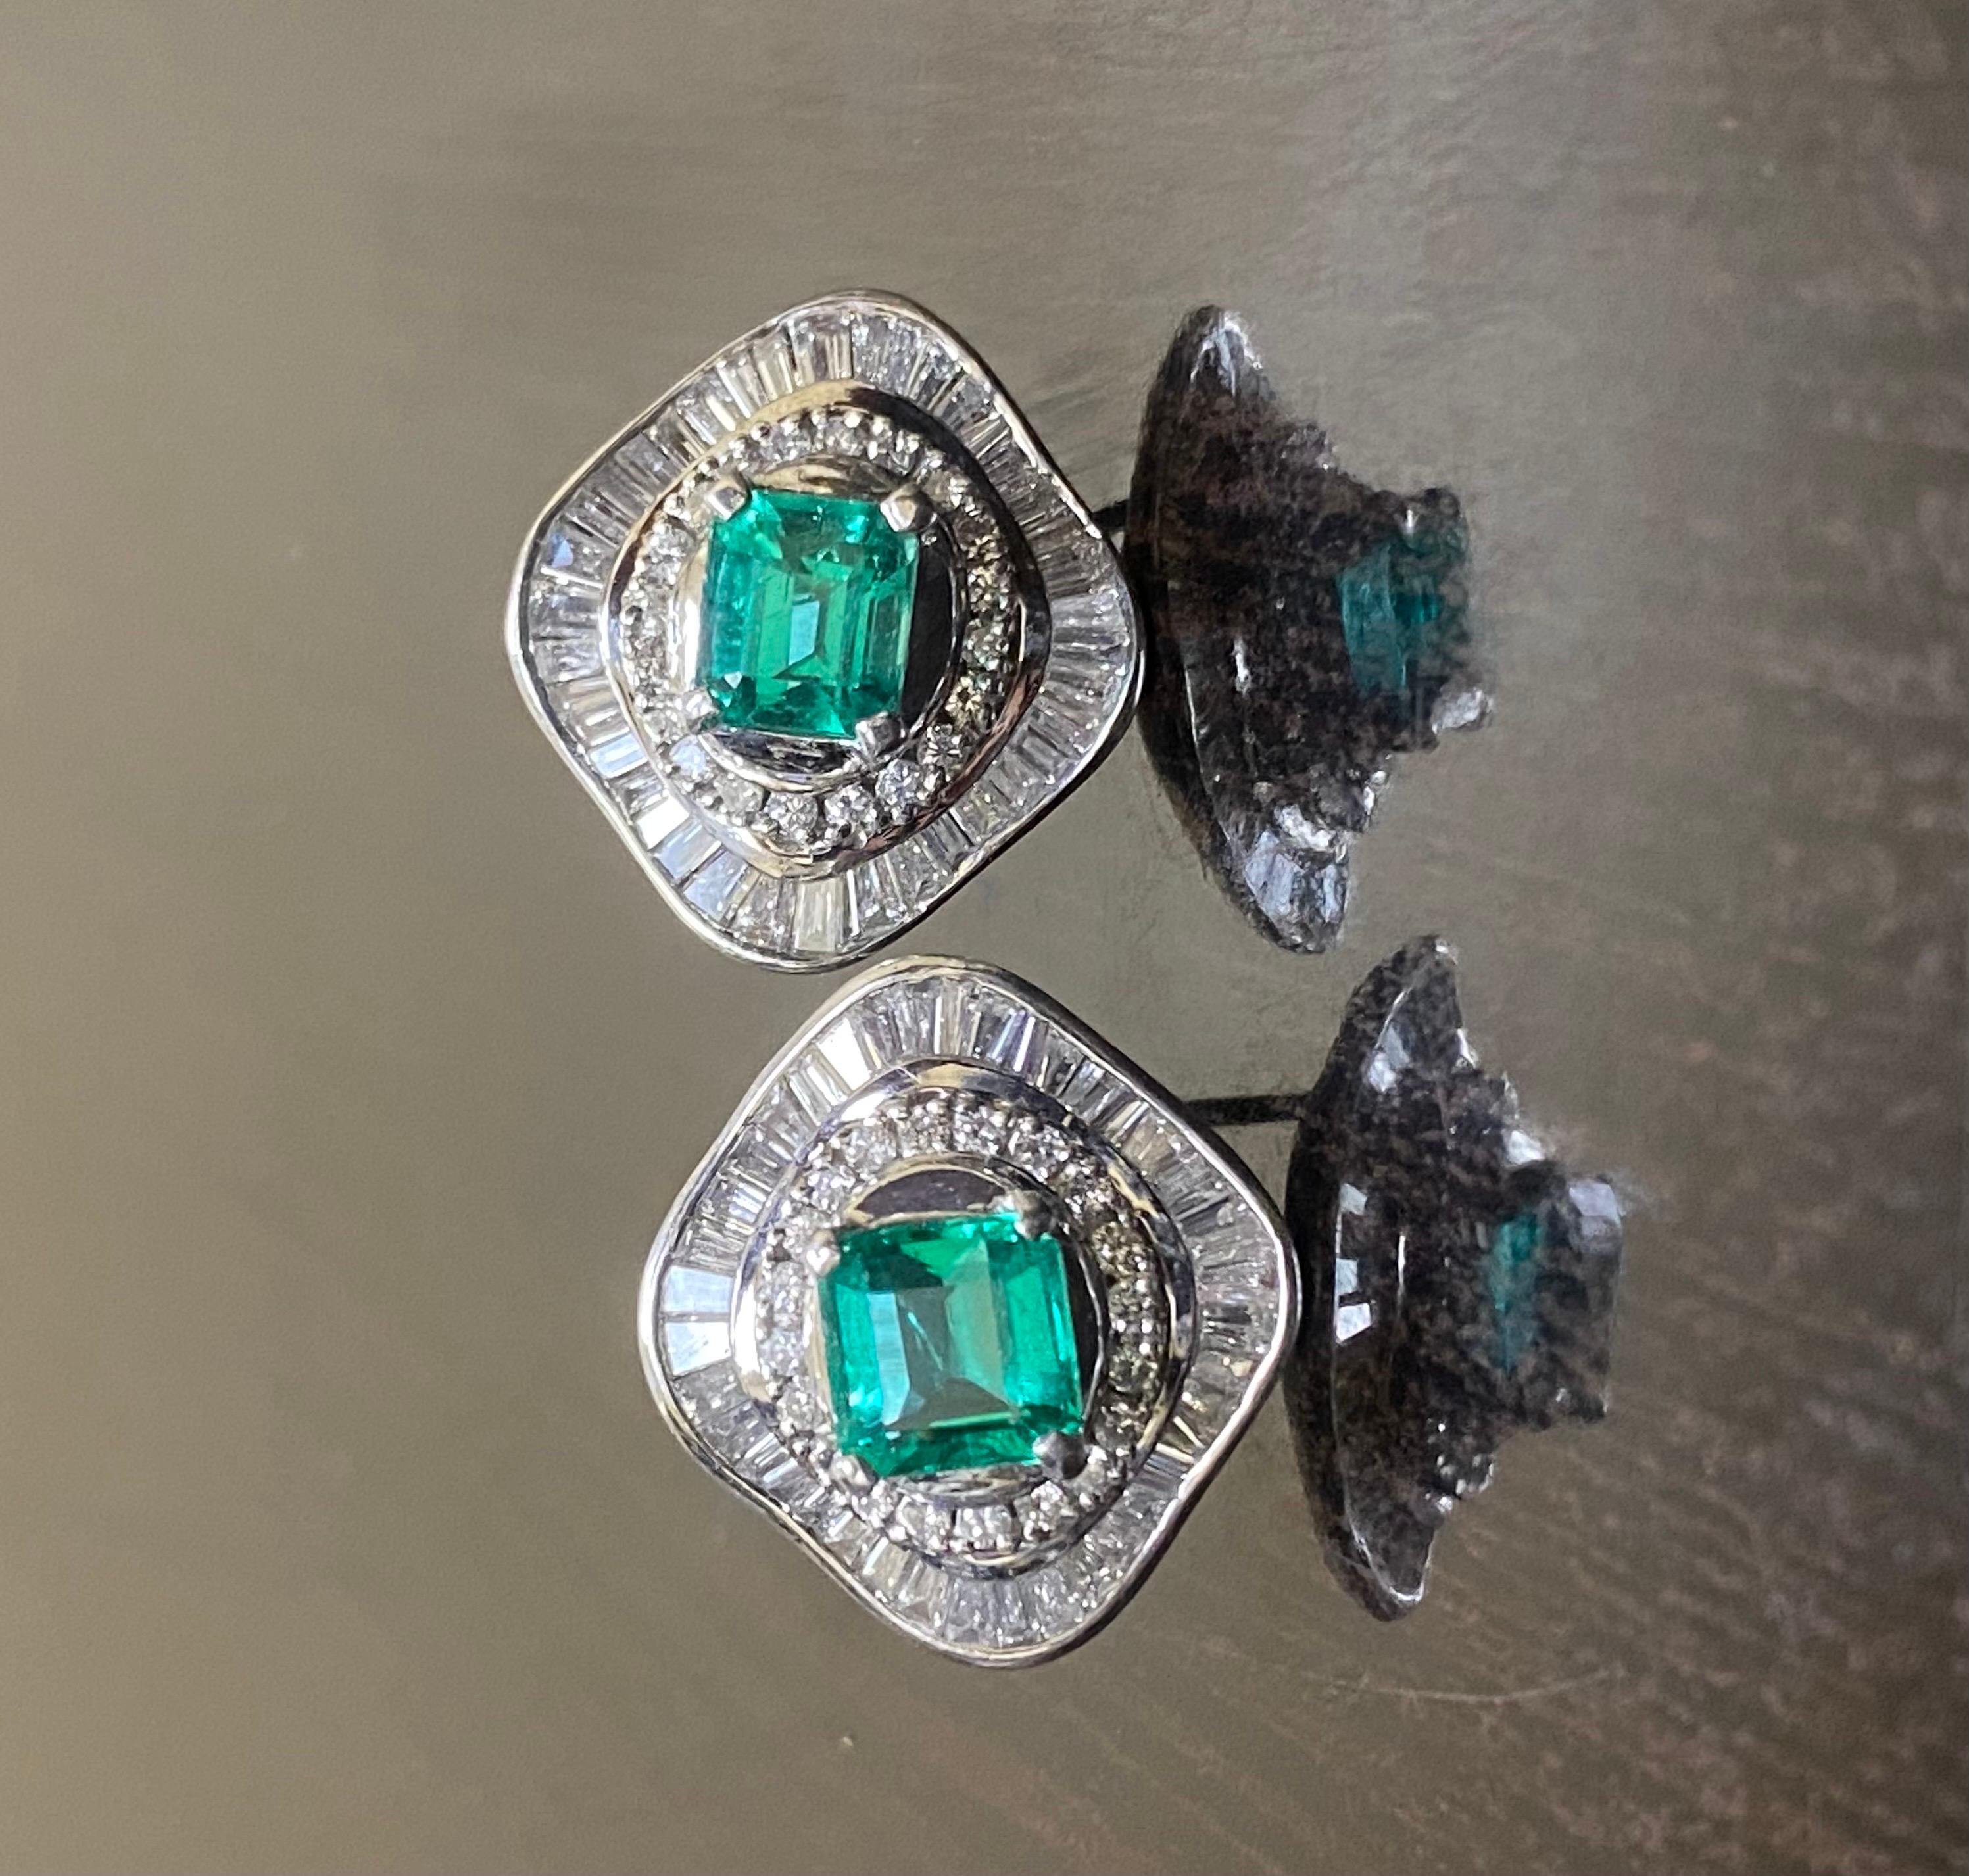 Art Deco Inspired Platinum Diamond 2.51 Carat Colombian Emerald Earrings In New Condition For Sale In Los Angeles, CA